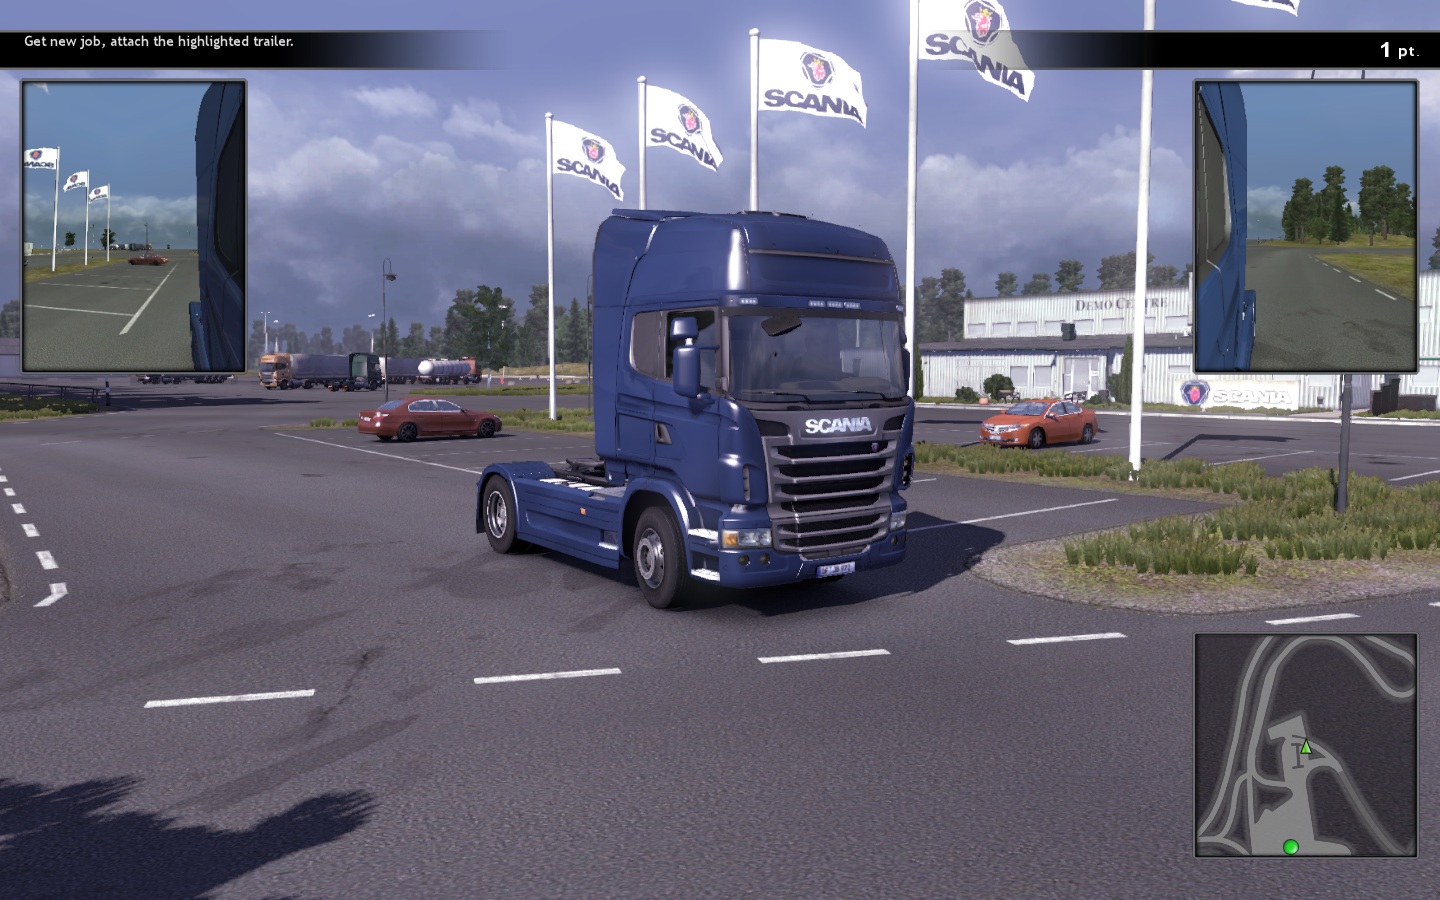 scania truck driving simulator the game download